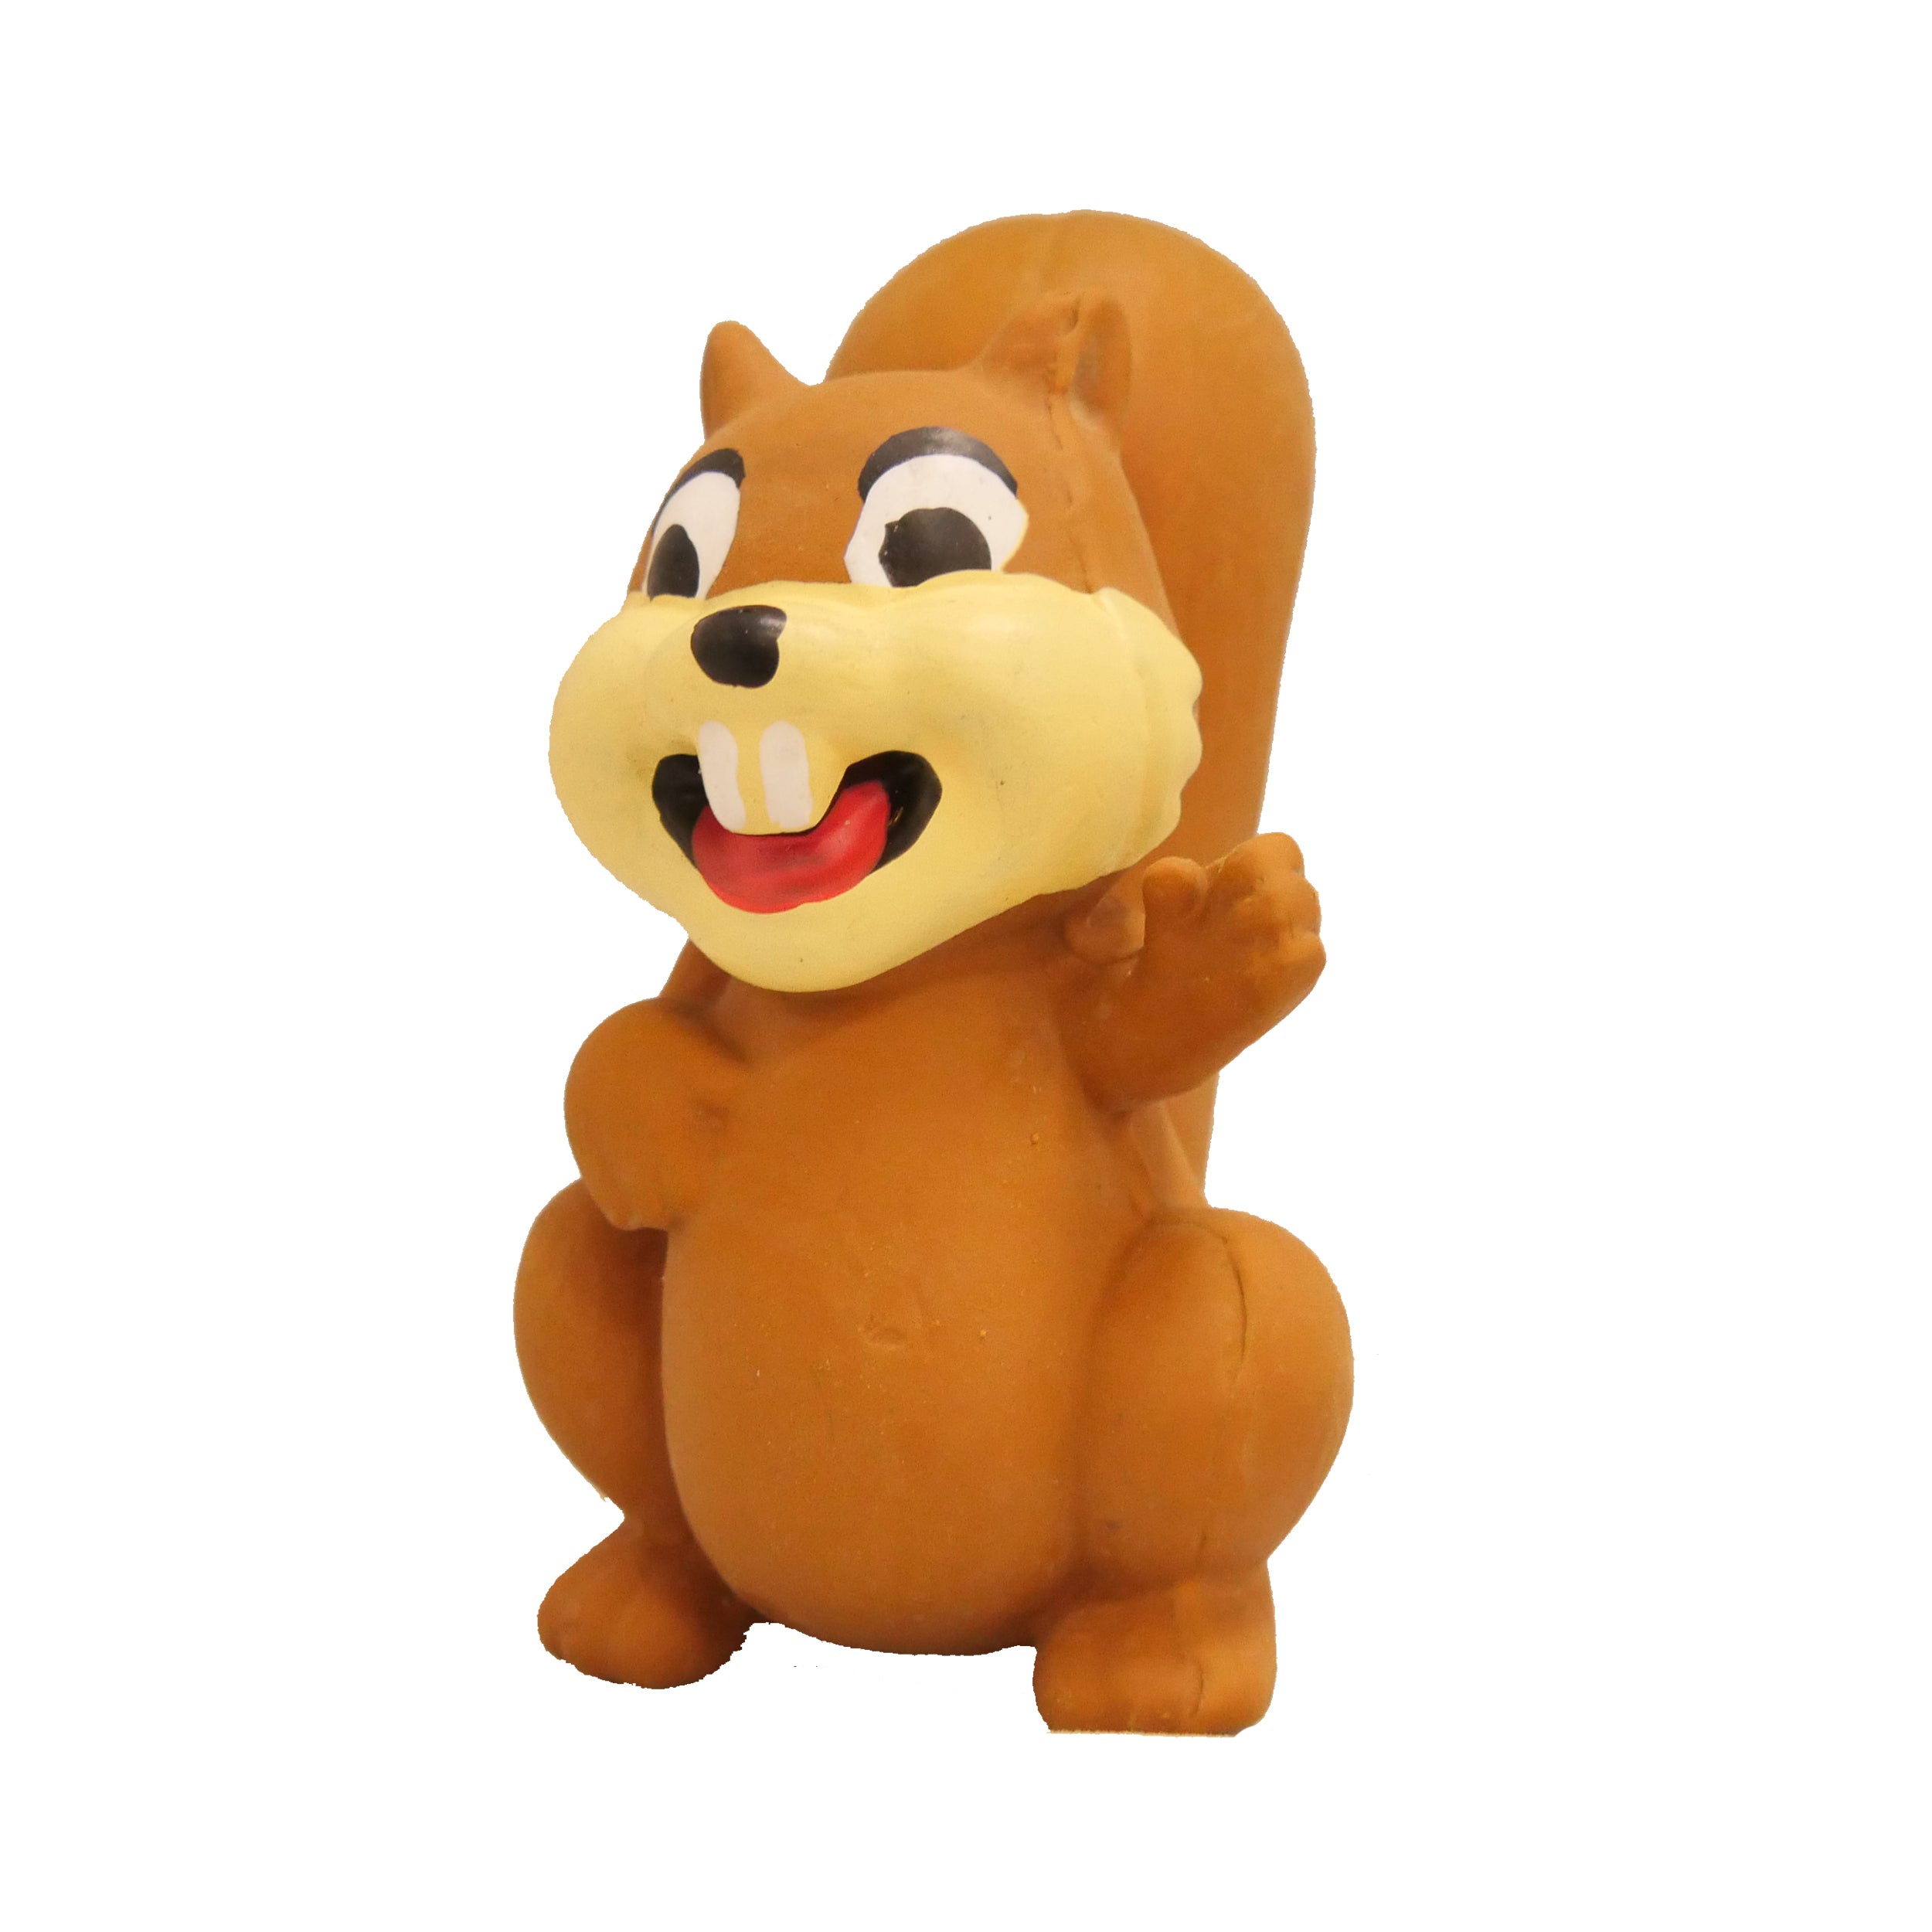 [Dog toy] cute brown rubber squirrel